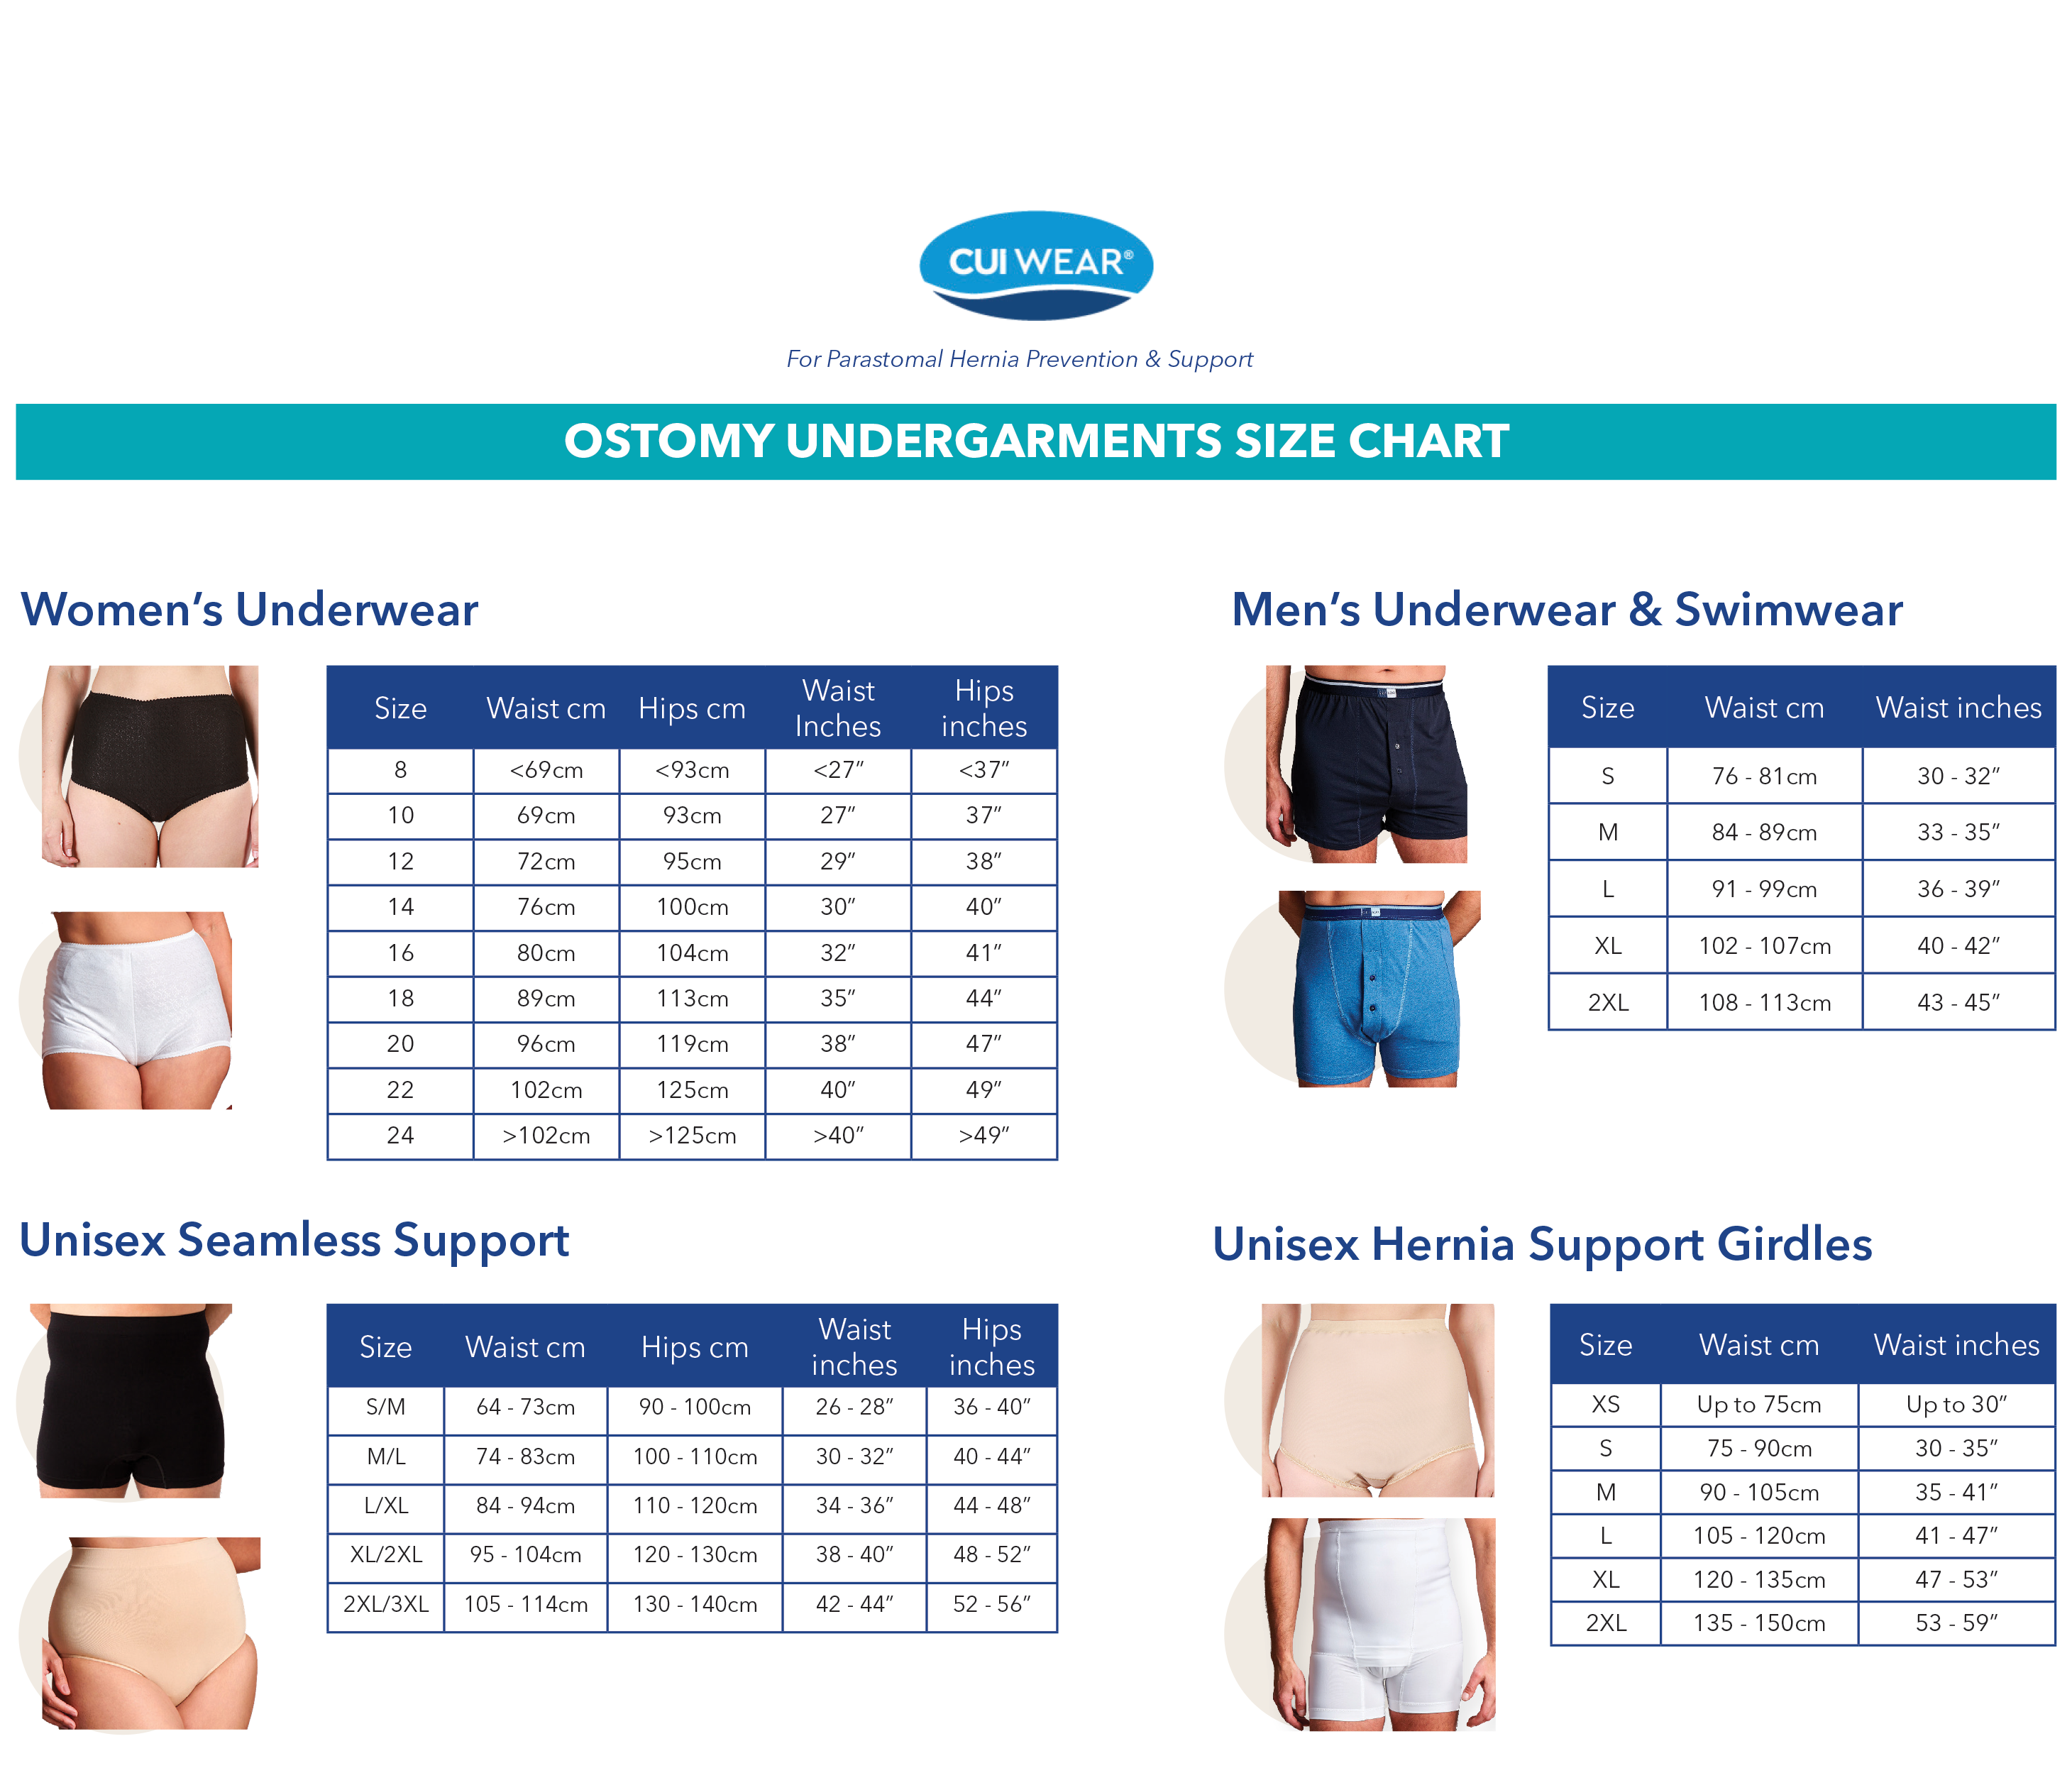 CUI Womens Hernia Low Waist Support Girdle Brief - 1 each, SMALL, WHITE - LOW-2